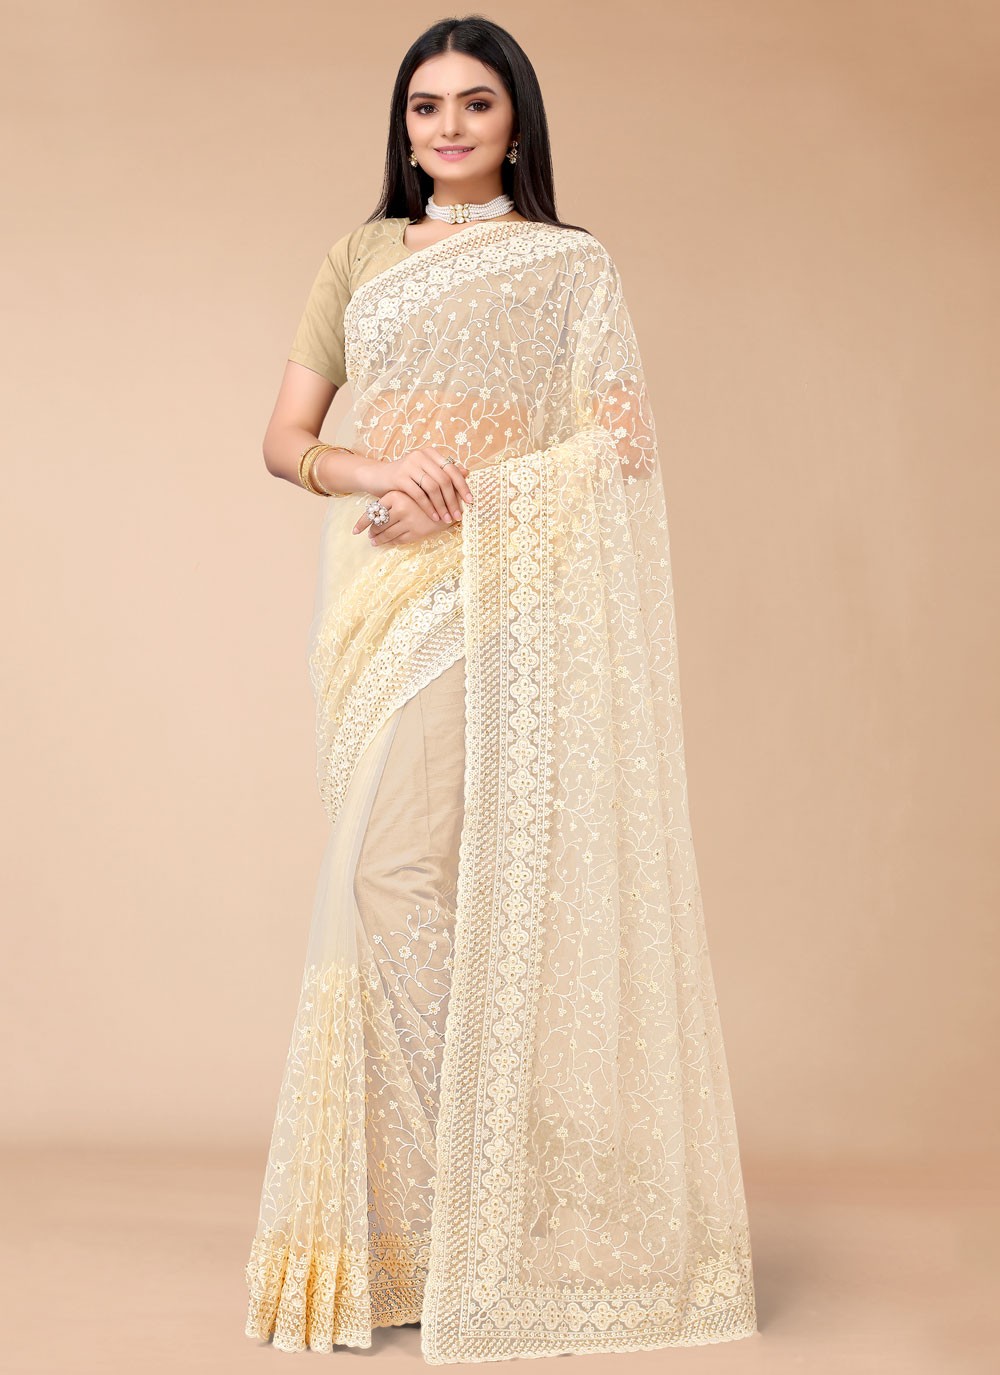 Beige Embroidered Party Contemporary Style Saree